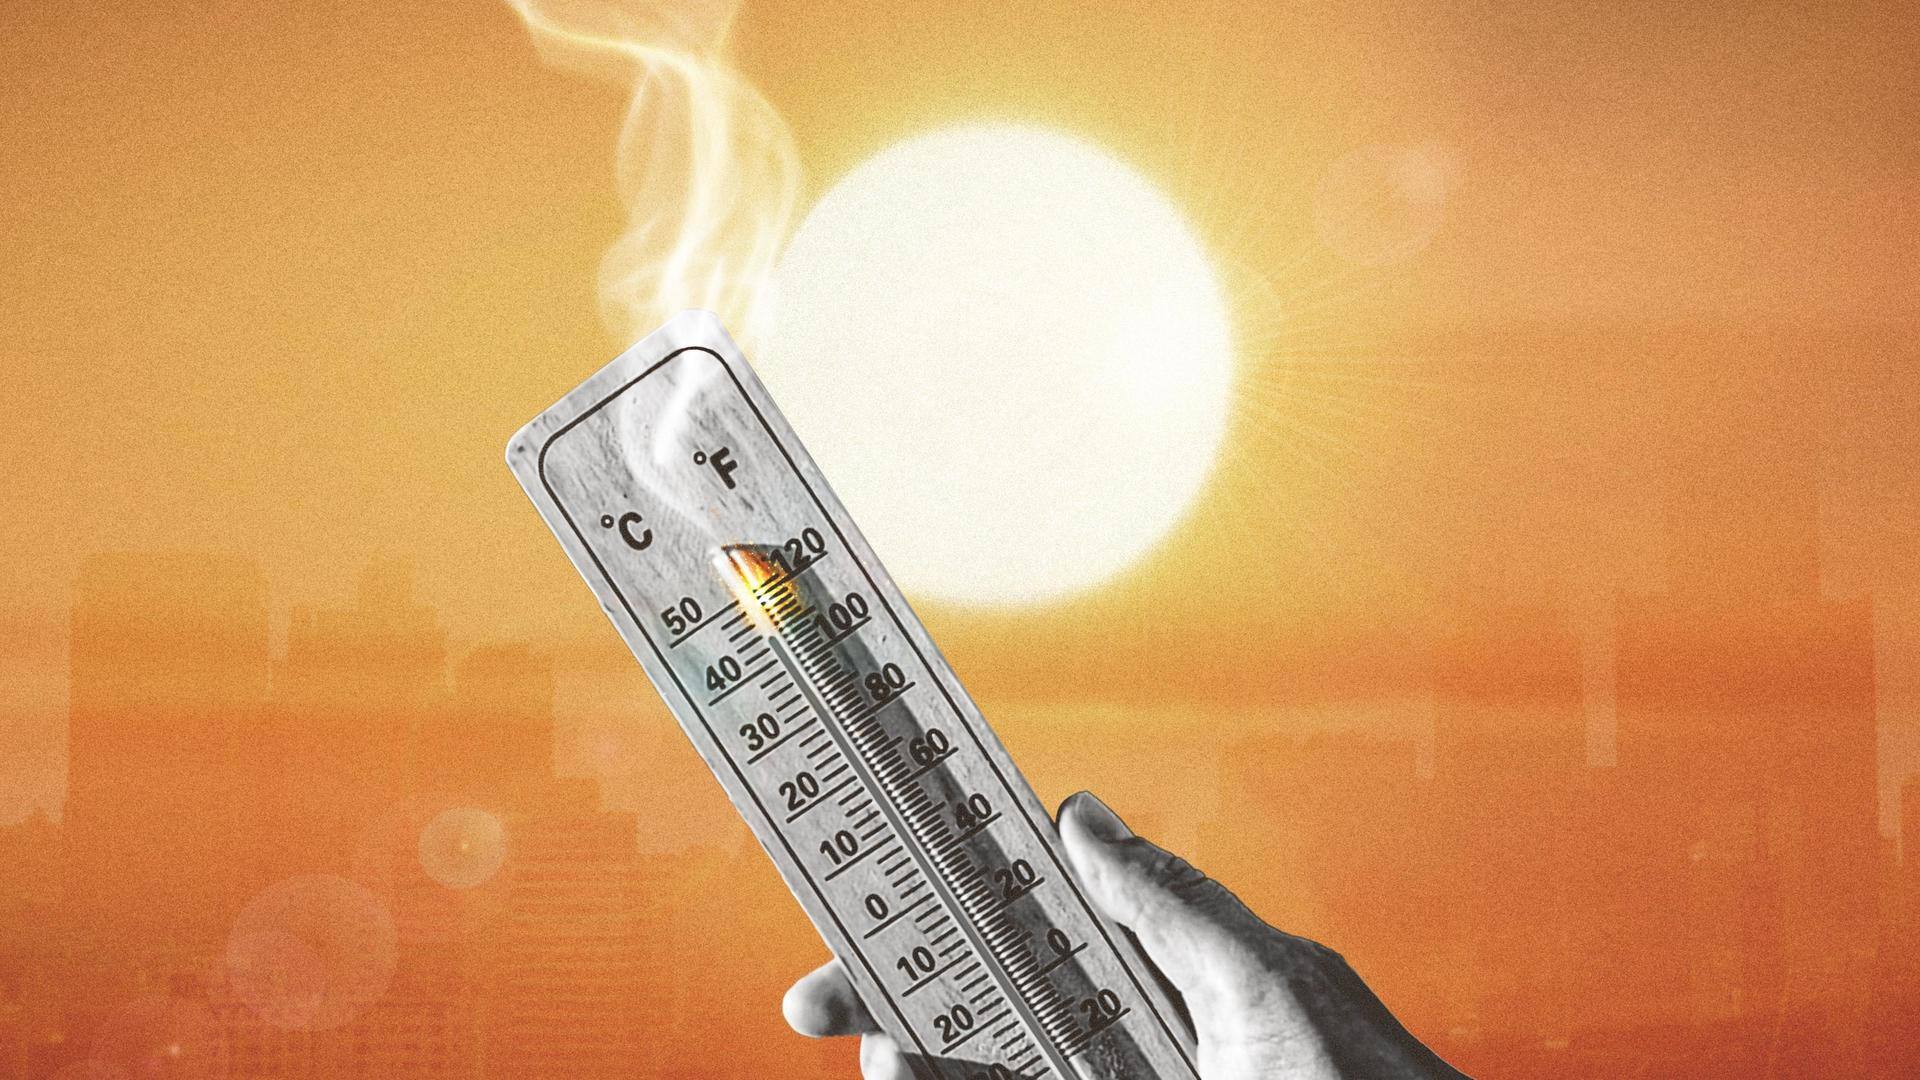 #Heatwave: Does India need a heat officer